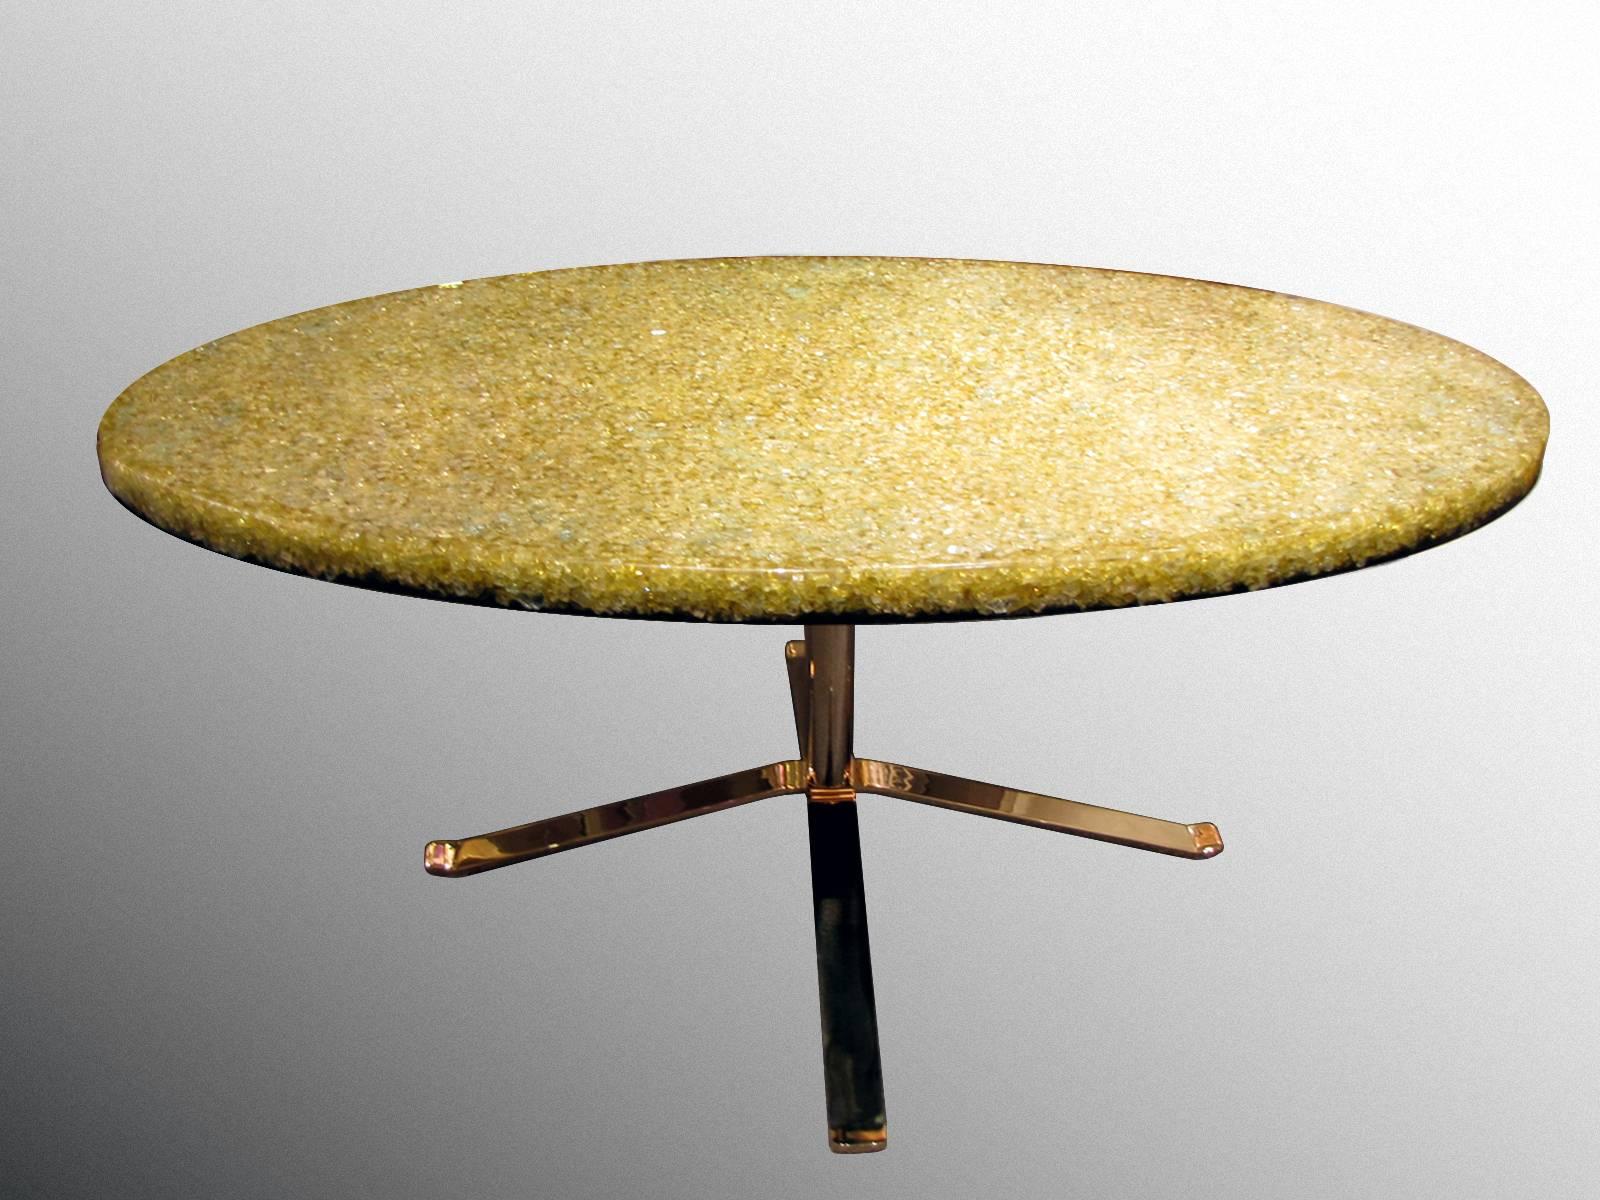 Coffee table with an oval resin top, circa 1970, by Pierre Giraudon (1923-2012).
Top in yellow translucent resin with many glass inclusions. The underside of the tray is in black resin. Four crossed legs in gilded stainless steel base.